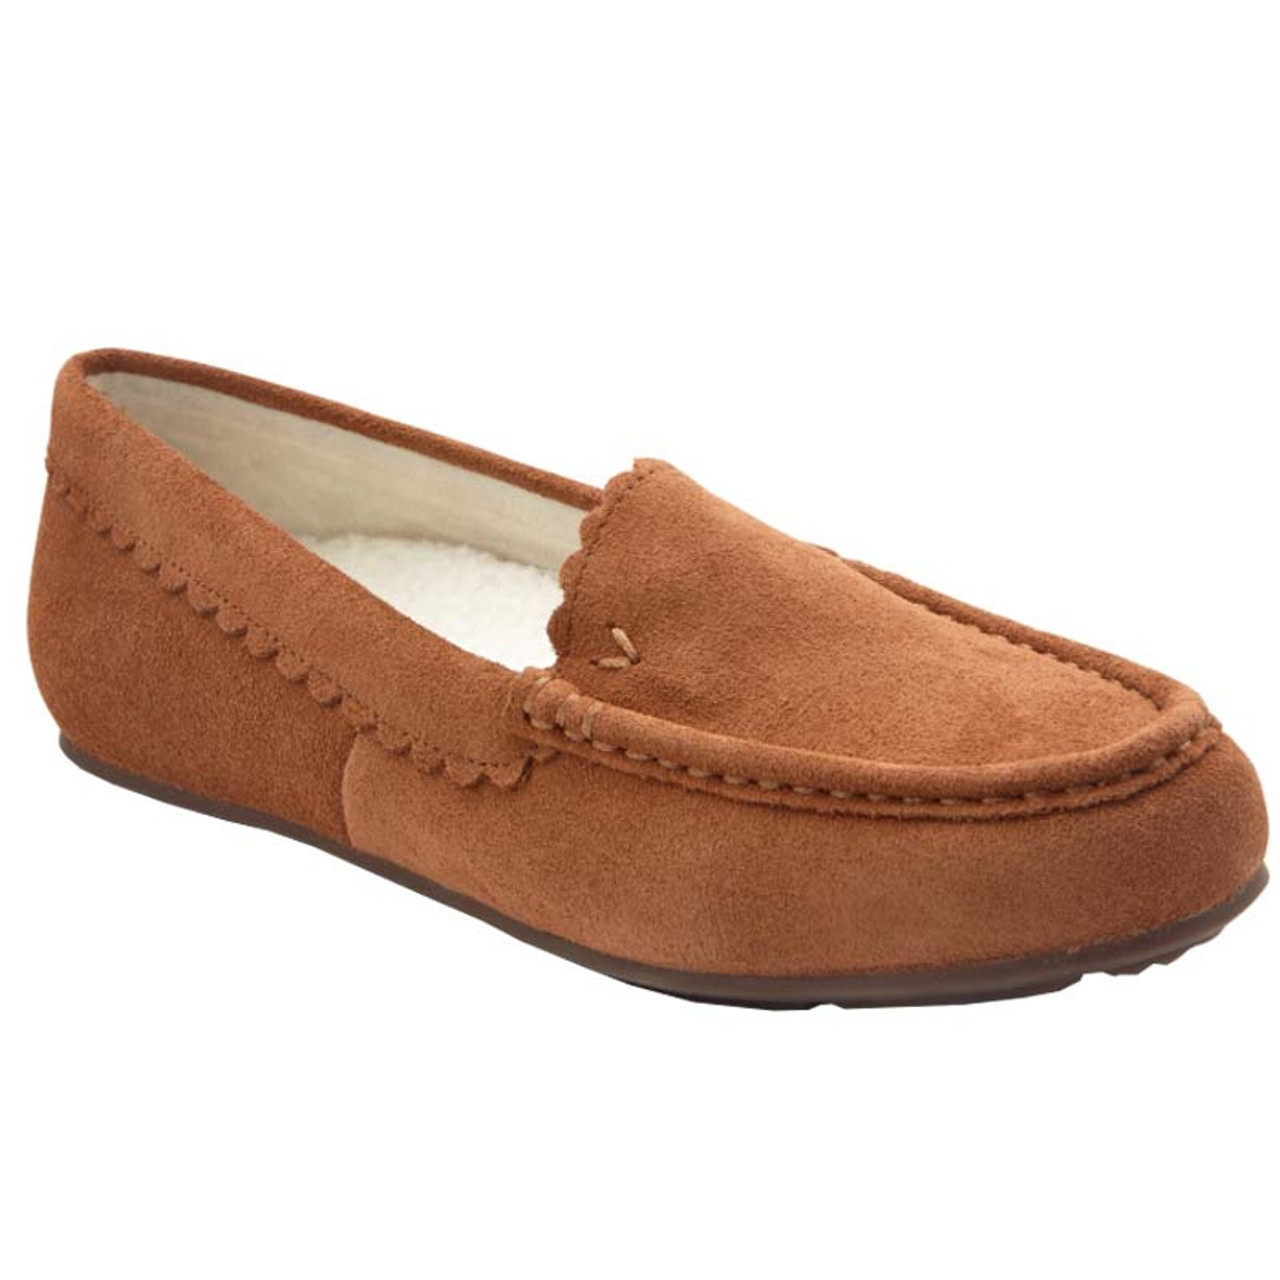 vionic moccasin slippers